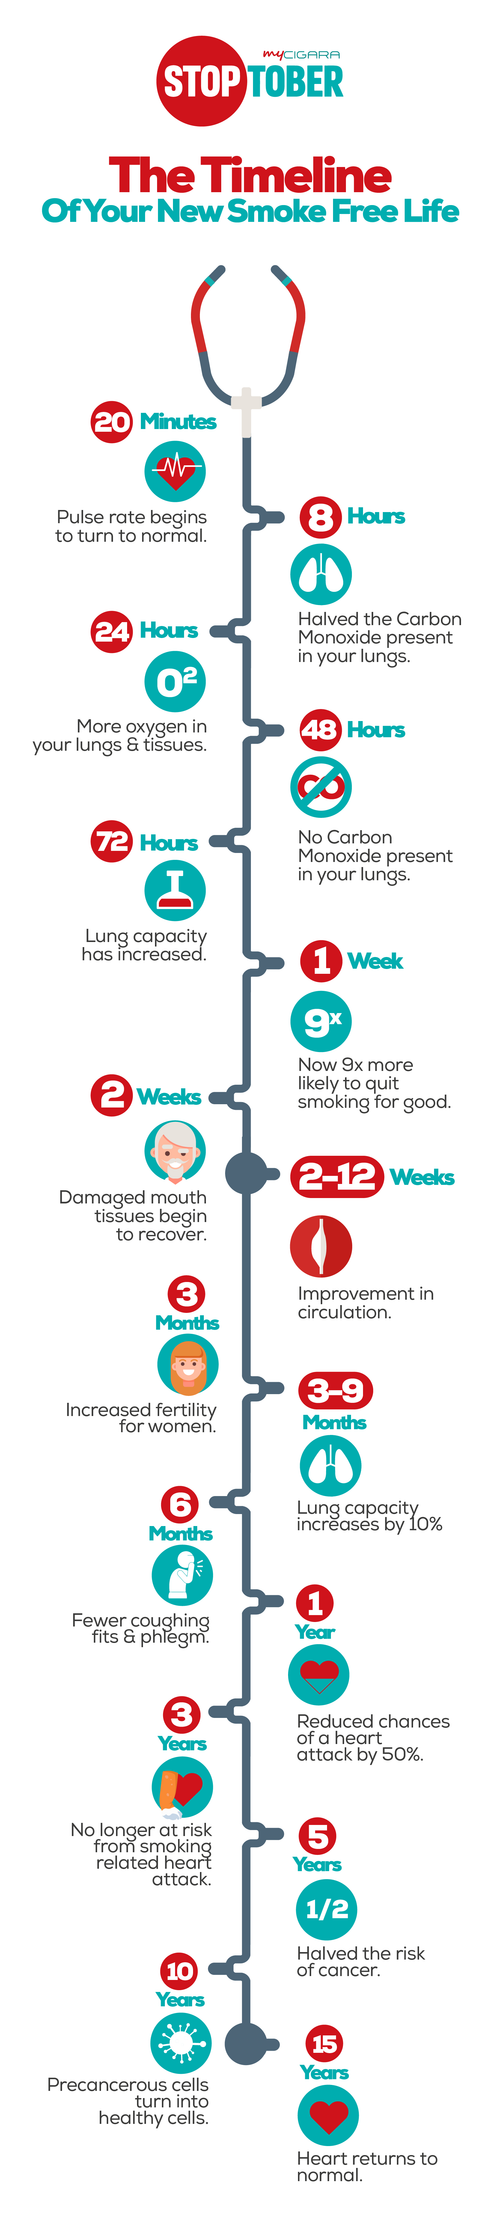 Depression Related to Quitting Smoking